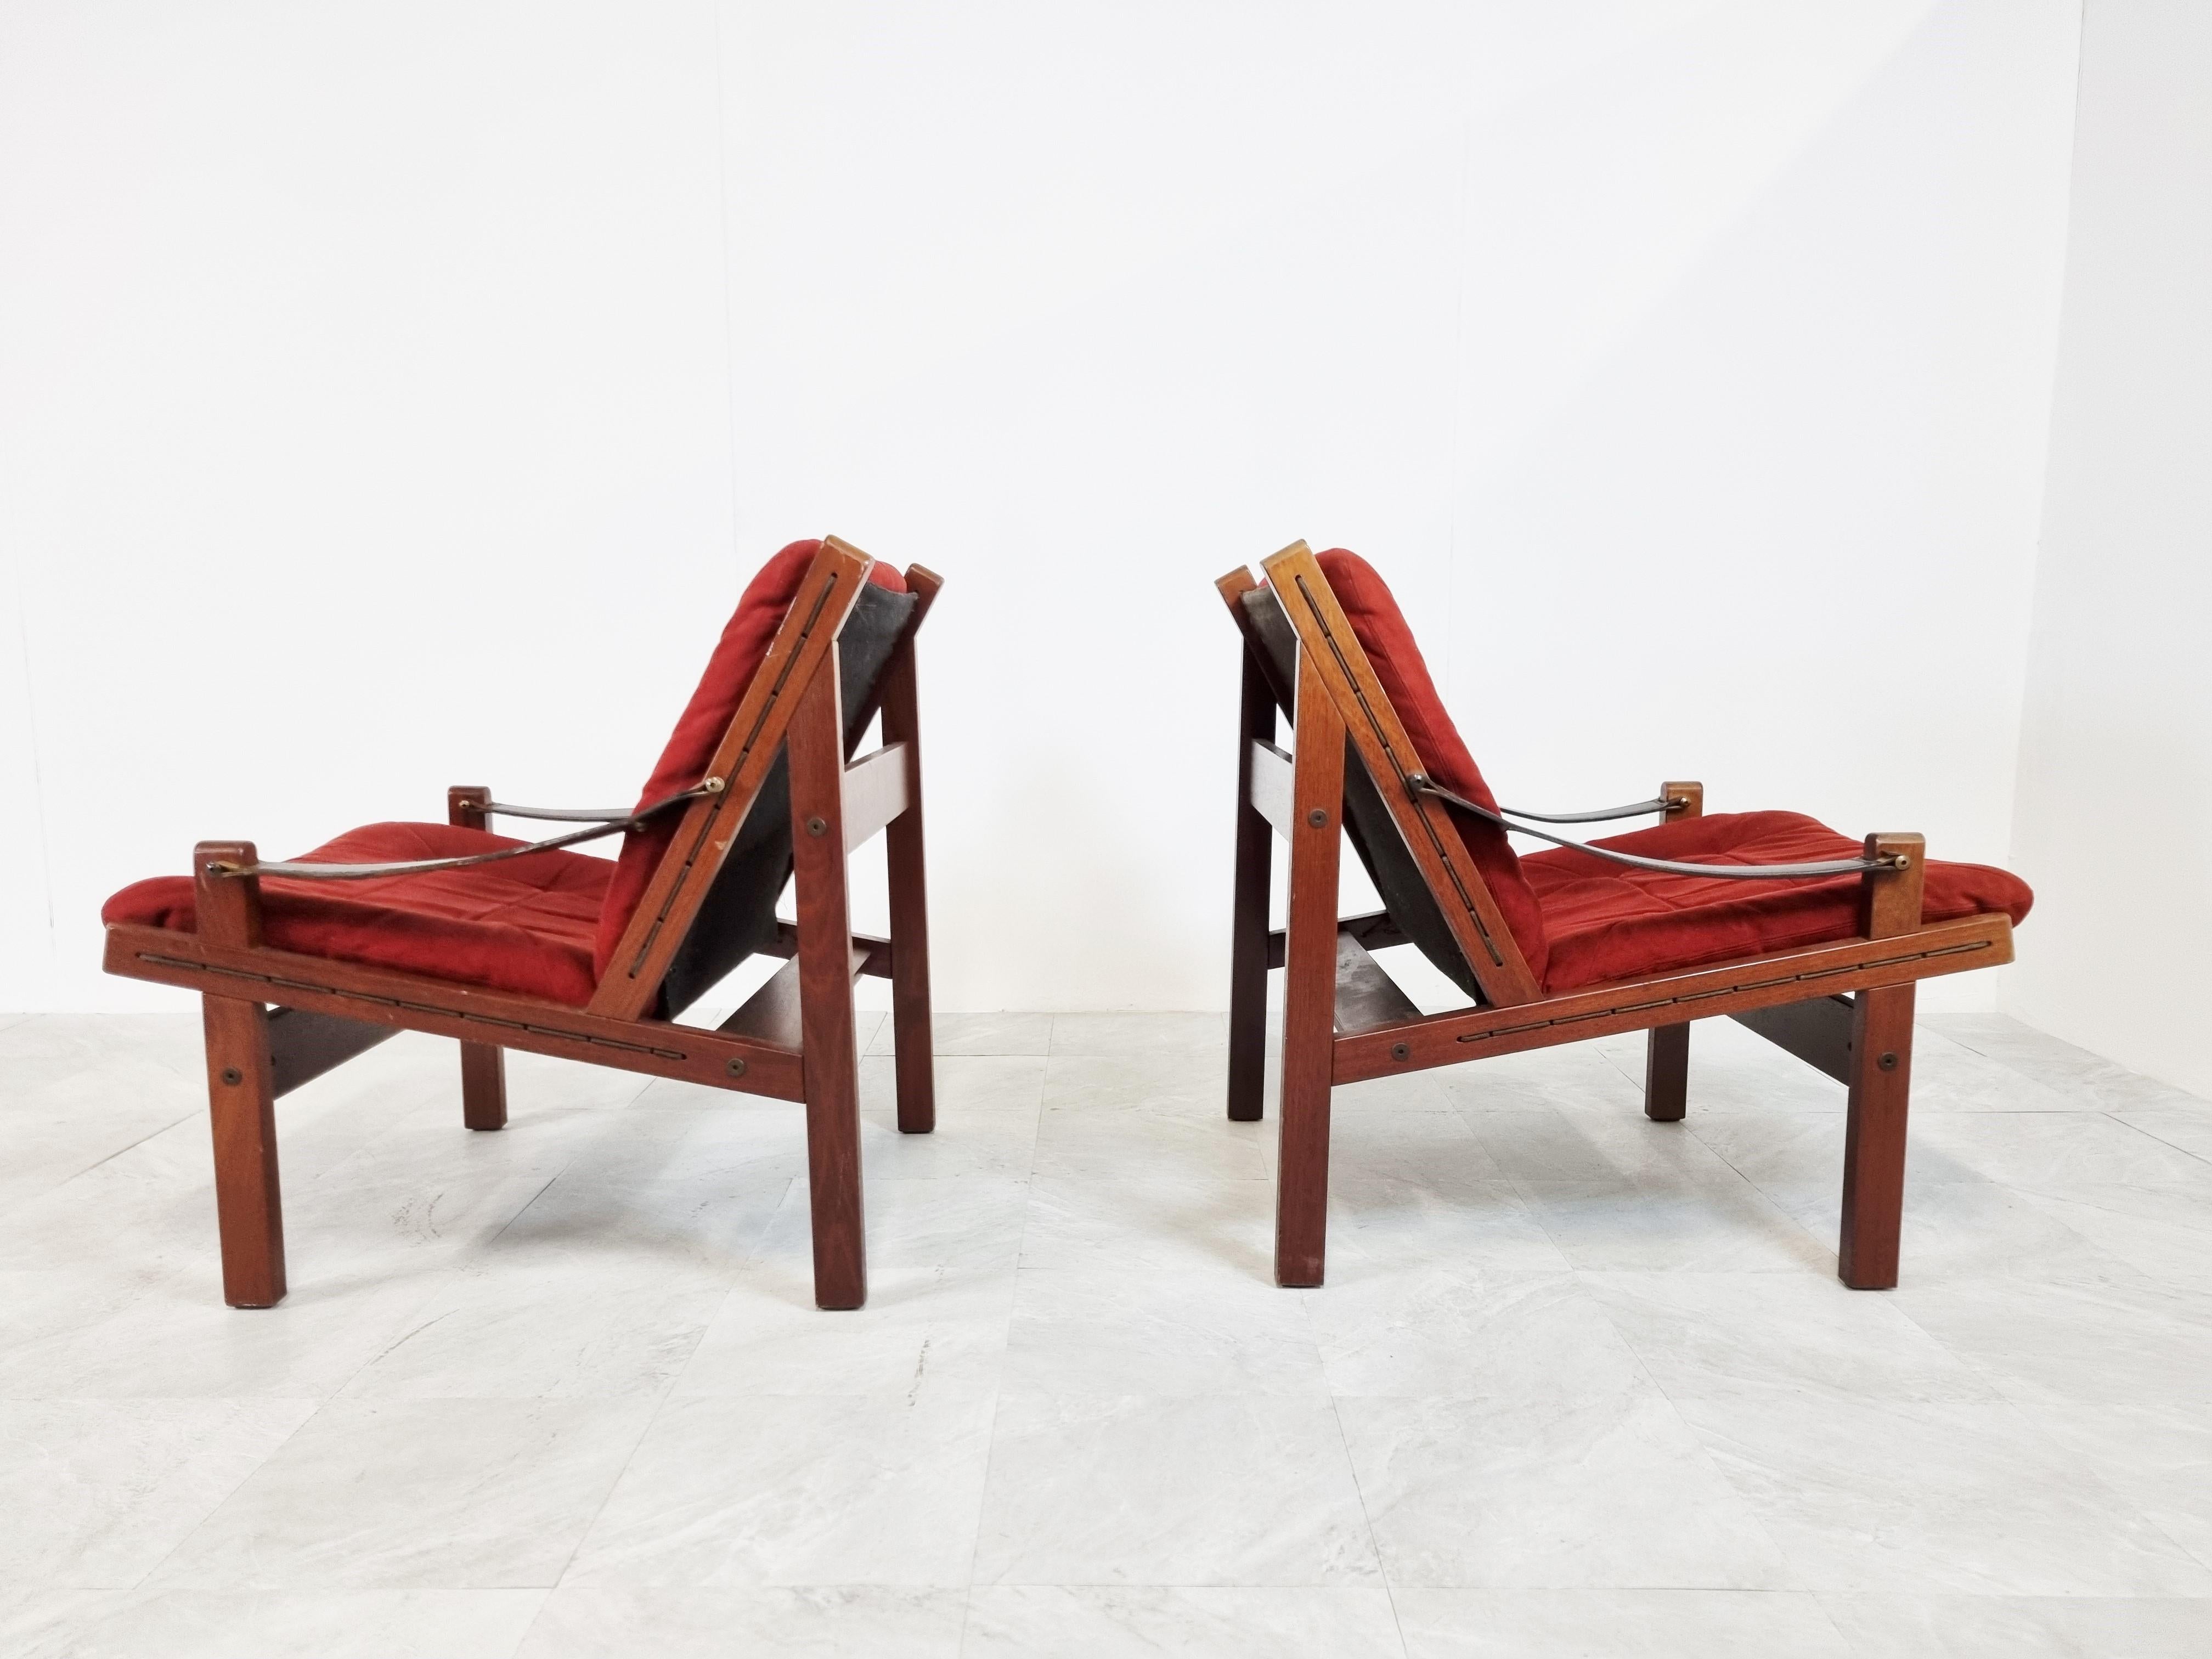 Charming pair of Norwegian armchairs designed by Torbjorn afdal for Bruksbo Norway.

Called 'Hunter chairs' but also referred to as Safari chairs.

Red velours upholstery, wooden frames and sling leather armrests

The chairs are in overal good